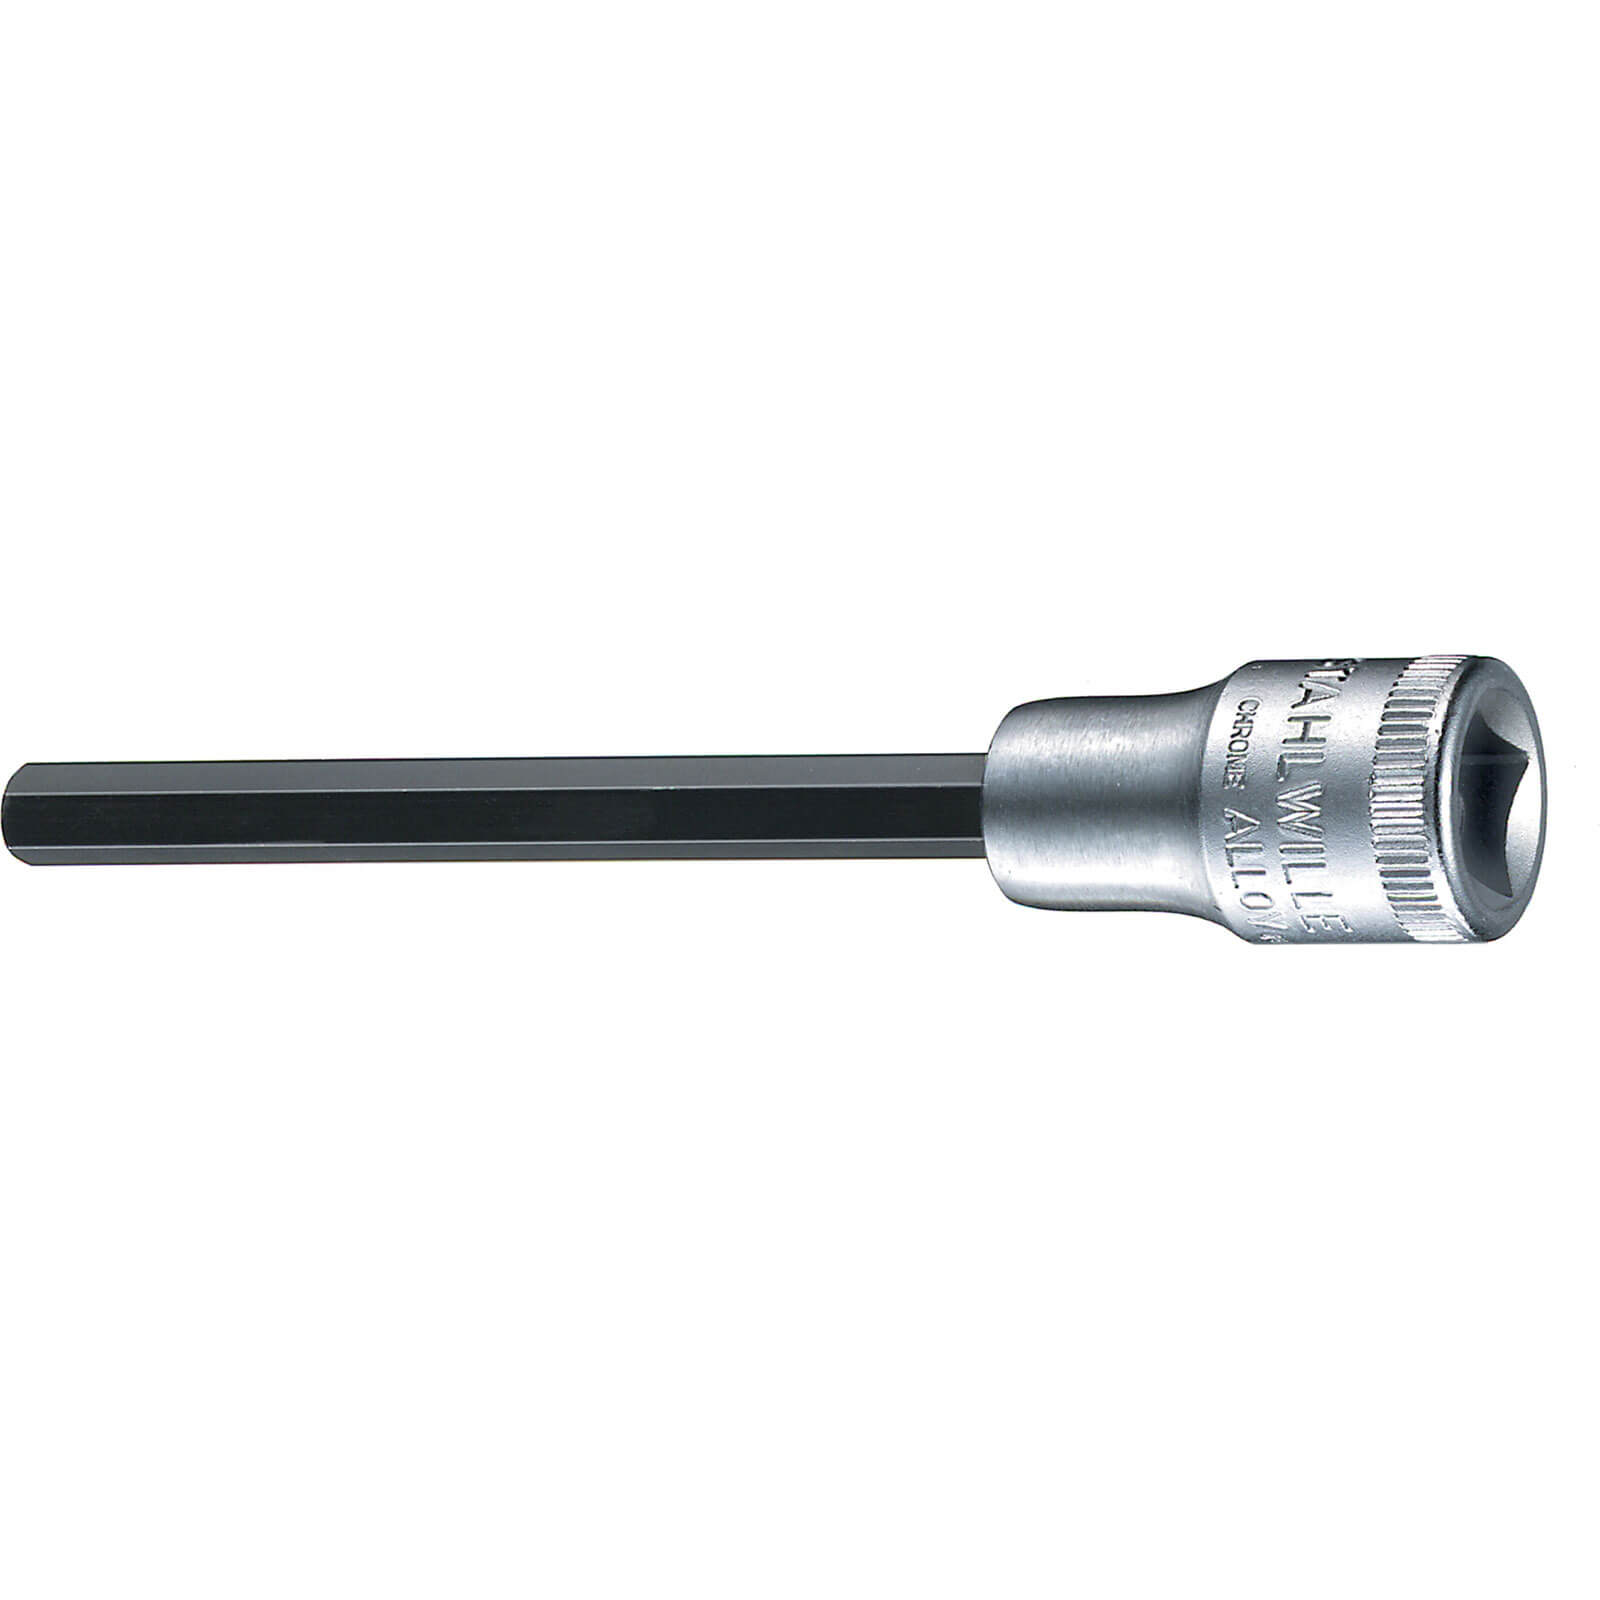 Image of Stahlwille 3/8" Drive Extra Long Hexagon Socket Bit 3/8" 4mm